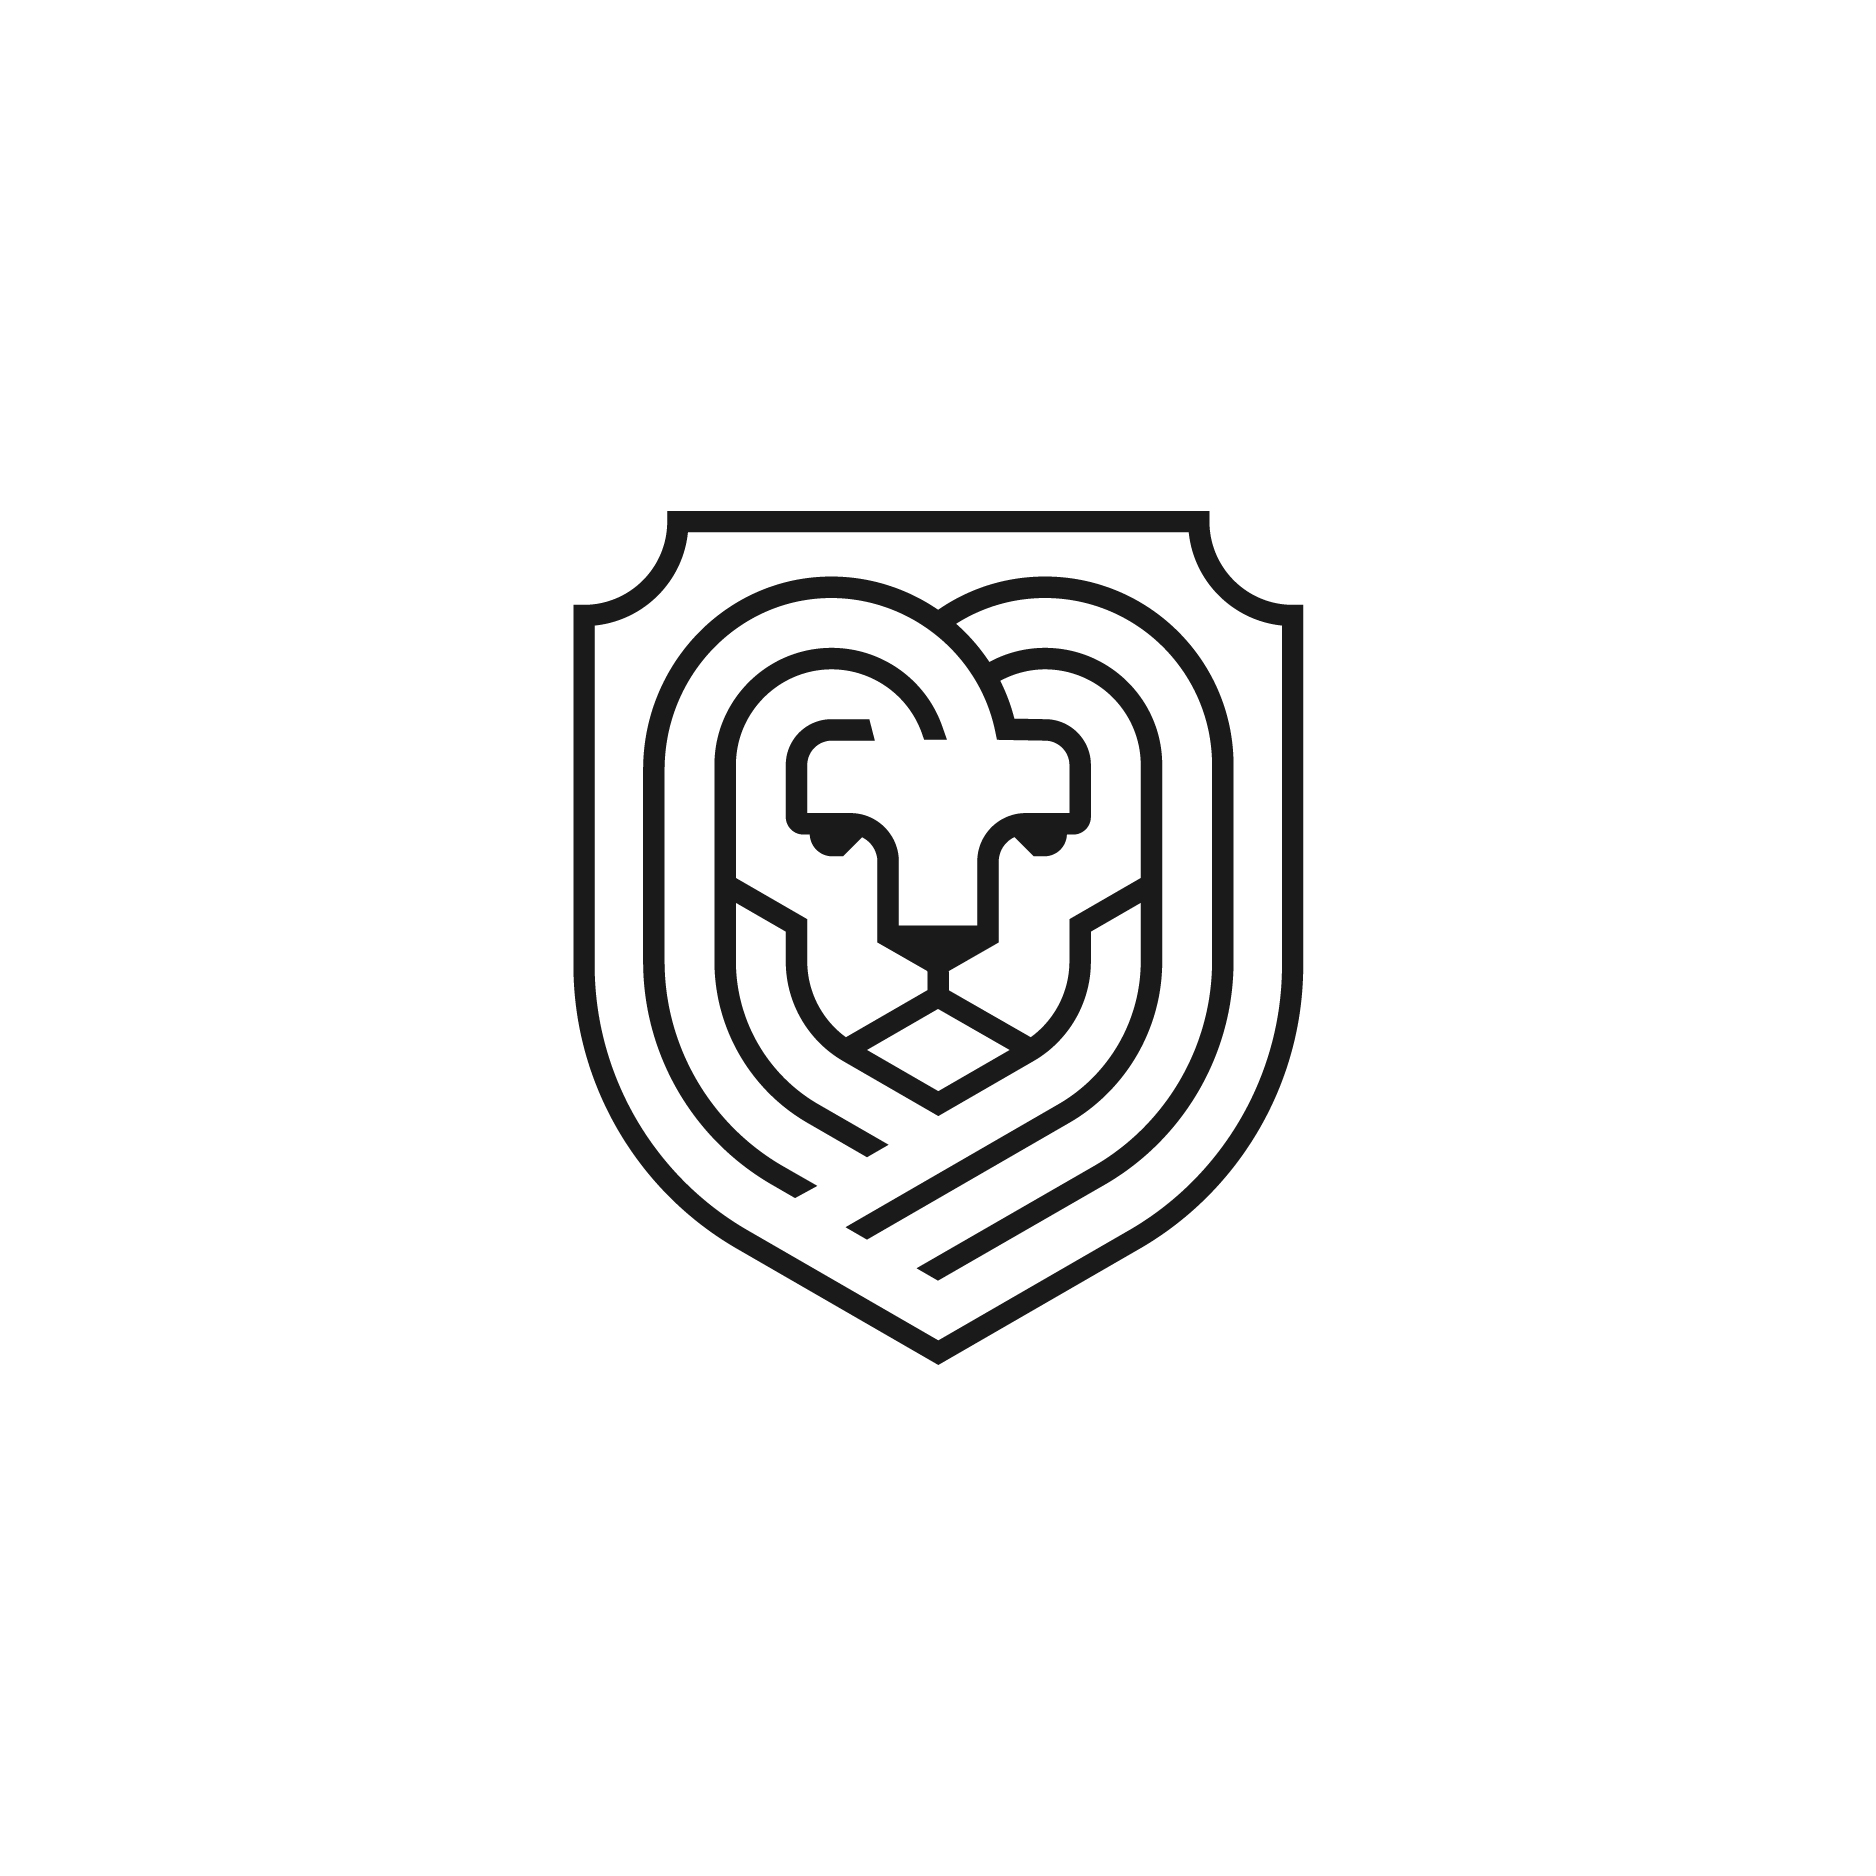 Lion Crest logo design by logo designer Dimitrije Mikovic for your inspiration and for the worlds largest logo competition